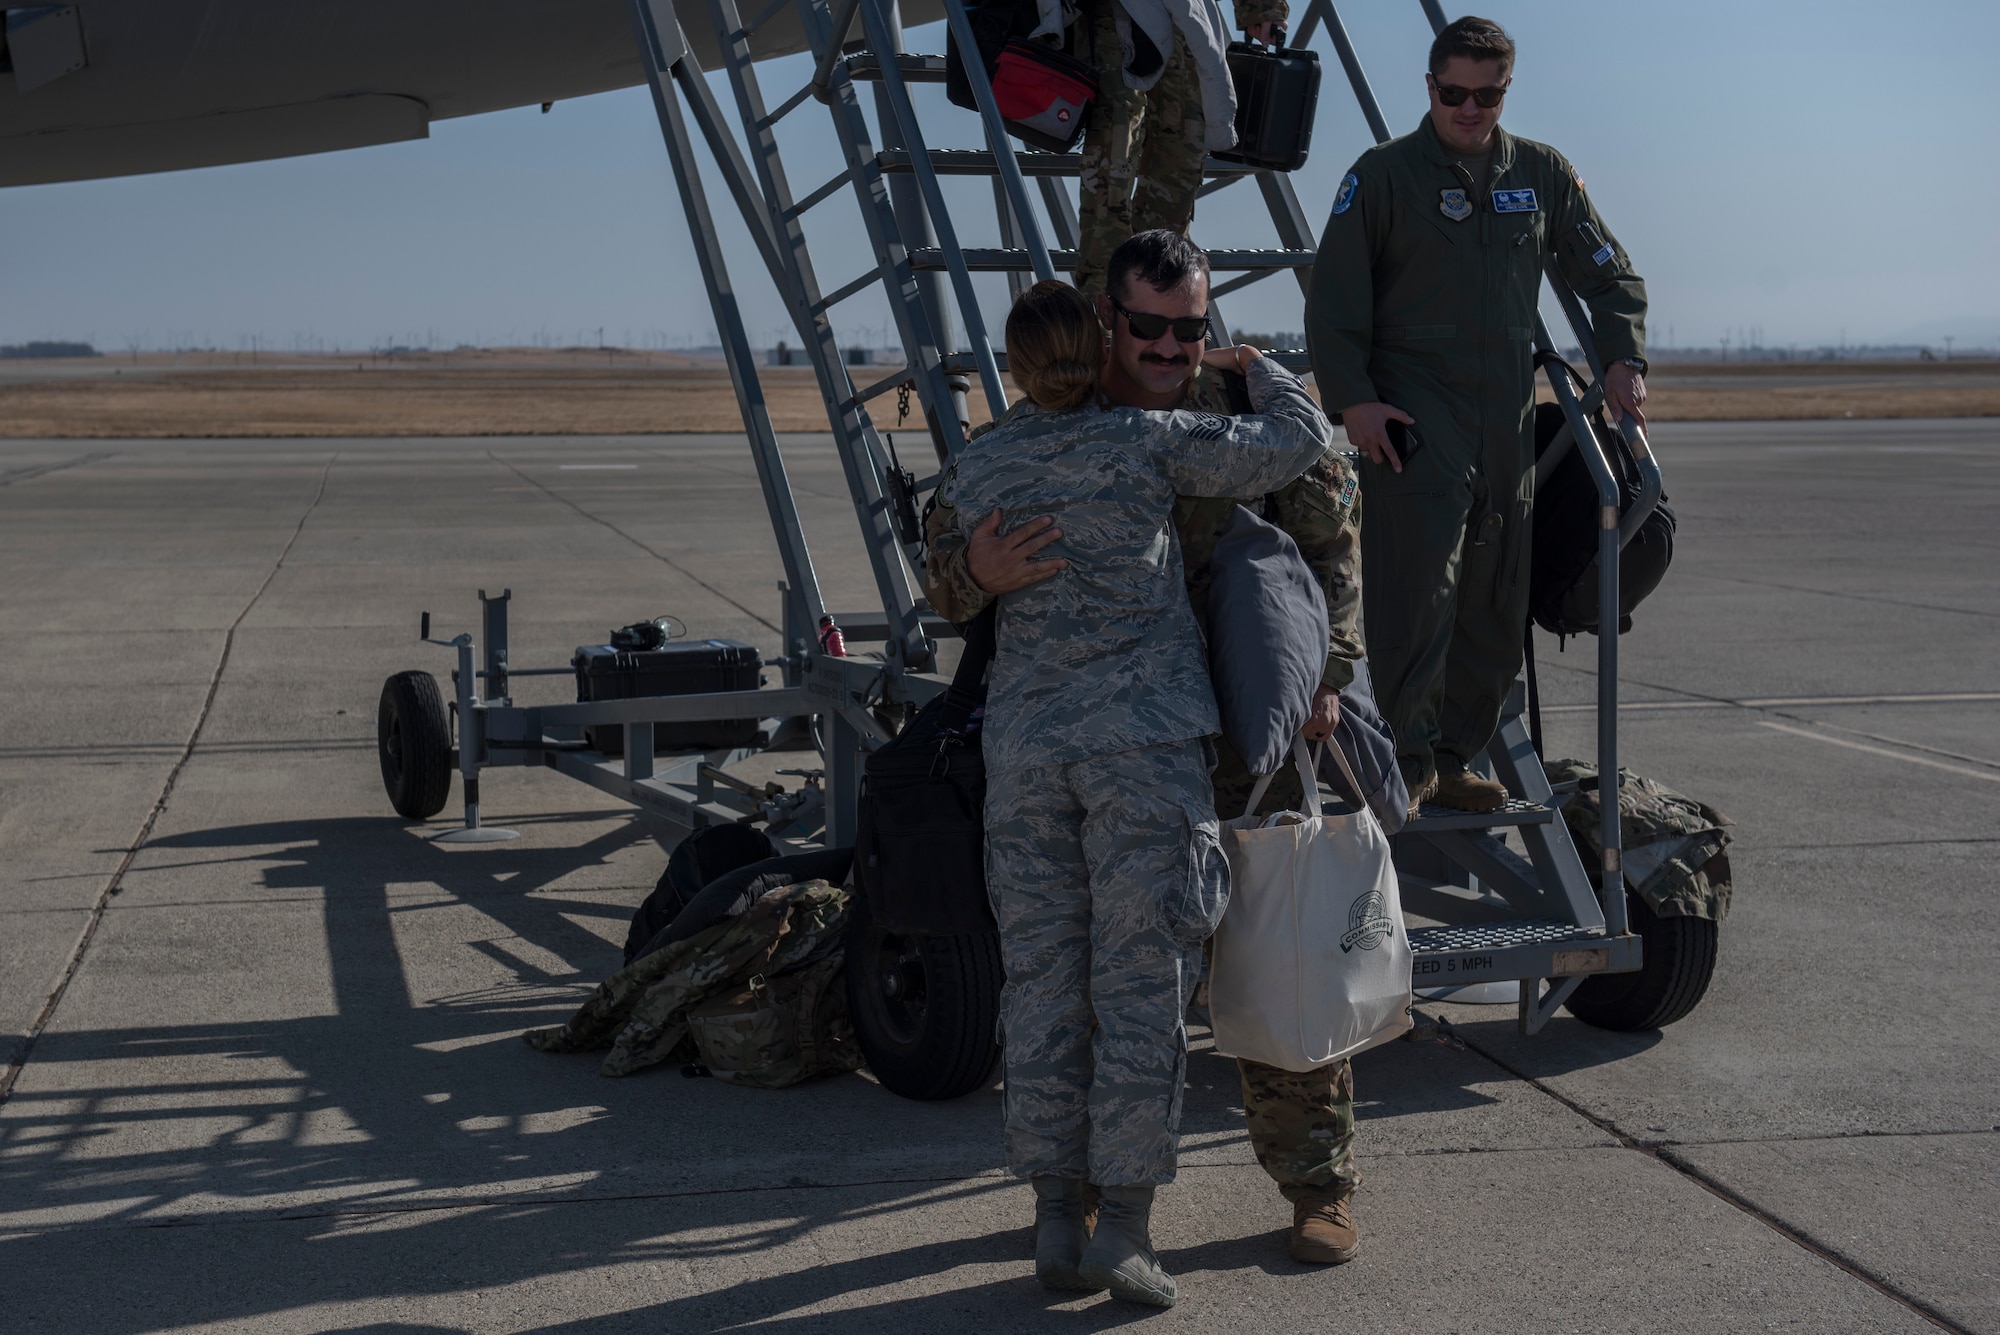 U.S. Air Force Tech. Sgt. Scott Appleby, 9th Air Refueling Squadron boom operator, embraces Tech. Sgt. Traci Keller, 60th Air Mobility Wing Public Affairs command information noncommission officer in charge, Nov. 21, 2019, at Travis Air Force Base, California. Scott was part of a KC-10 aircrew that supported operations in Southwest Asia for two months. (U.S. Air Force photo by Airman 1st Class Cameron Otte)